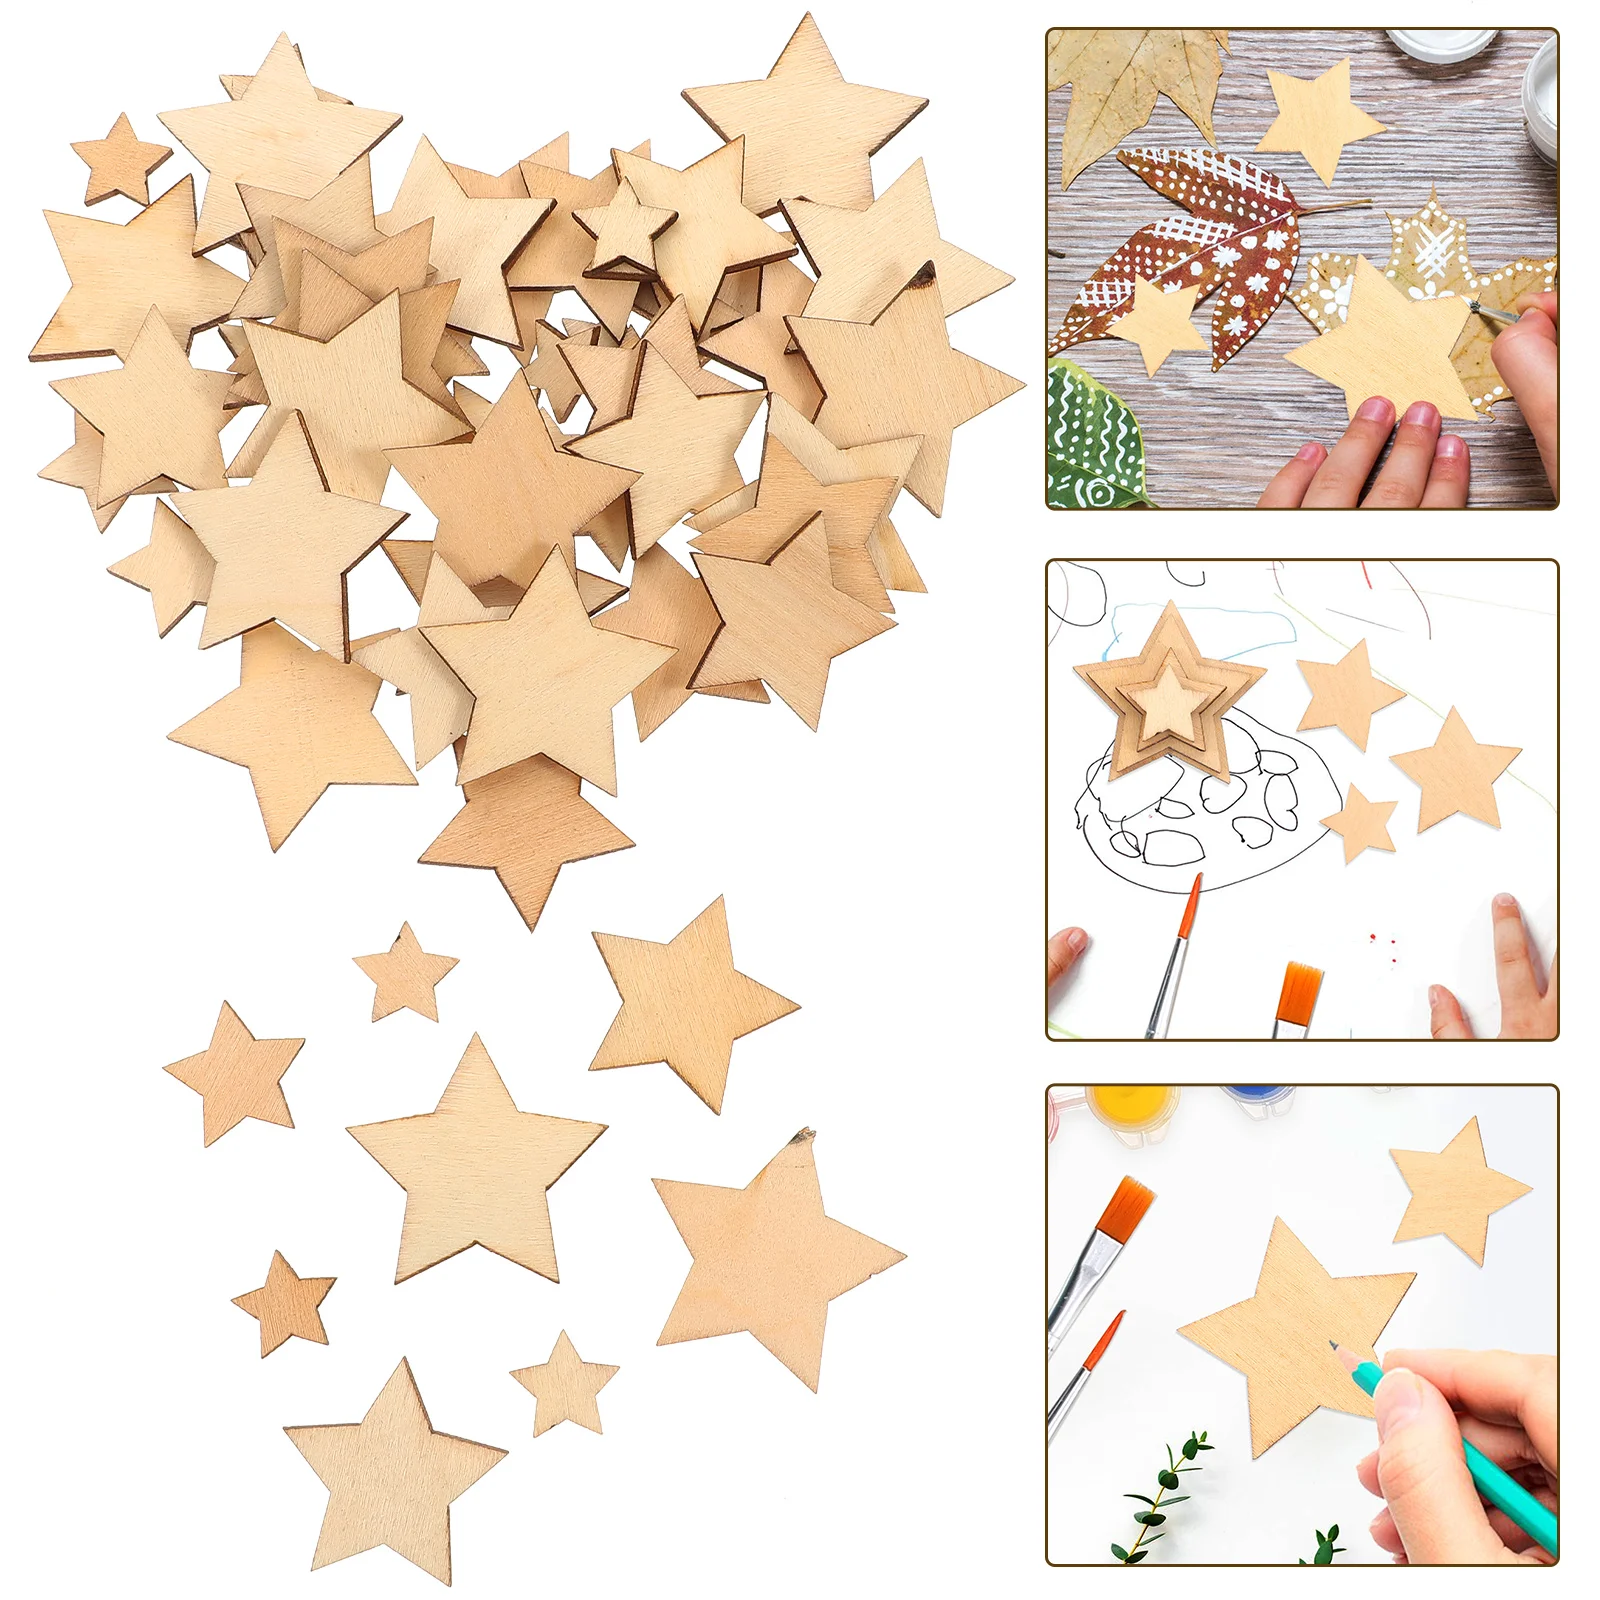 

Wooden Wood Star Cutouts Craft Ornaments Unfinished Pieces Crafts Embellishments Decorations Christmas Shapes Shape Stars Blank